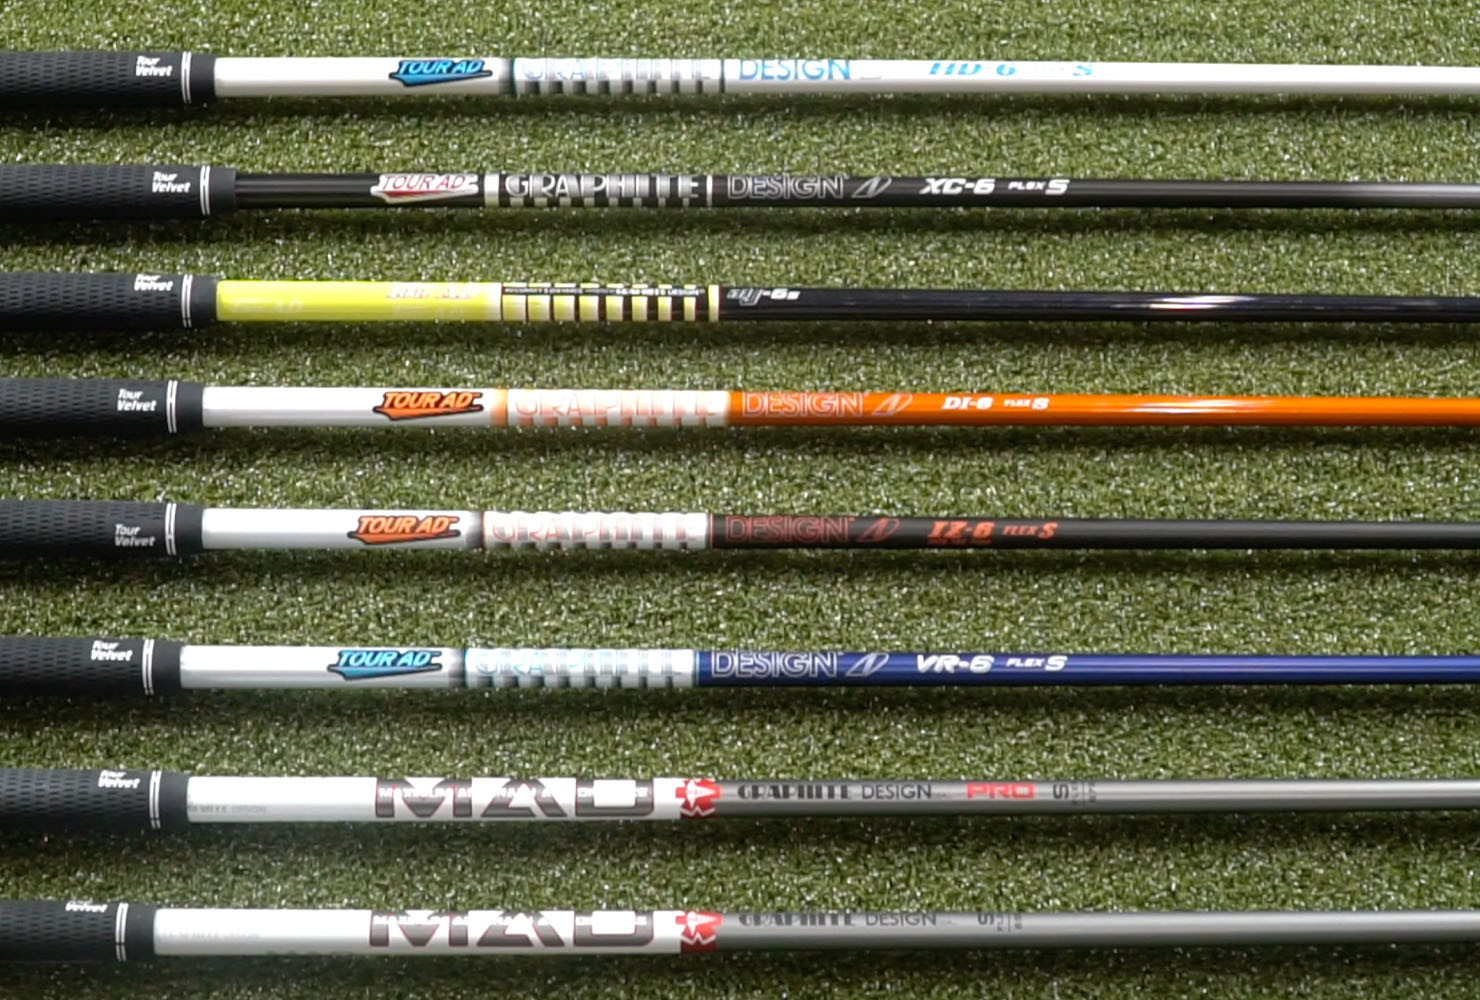 TESTED! Graphite Design Tour AD Shafts - The Hackers Paradise